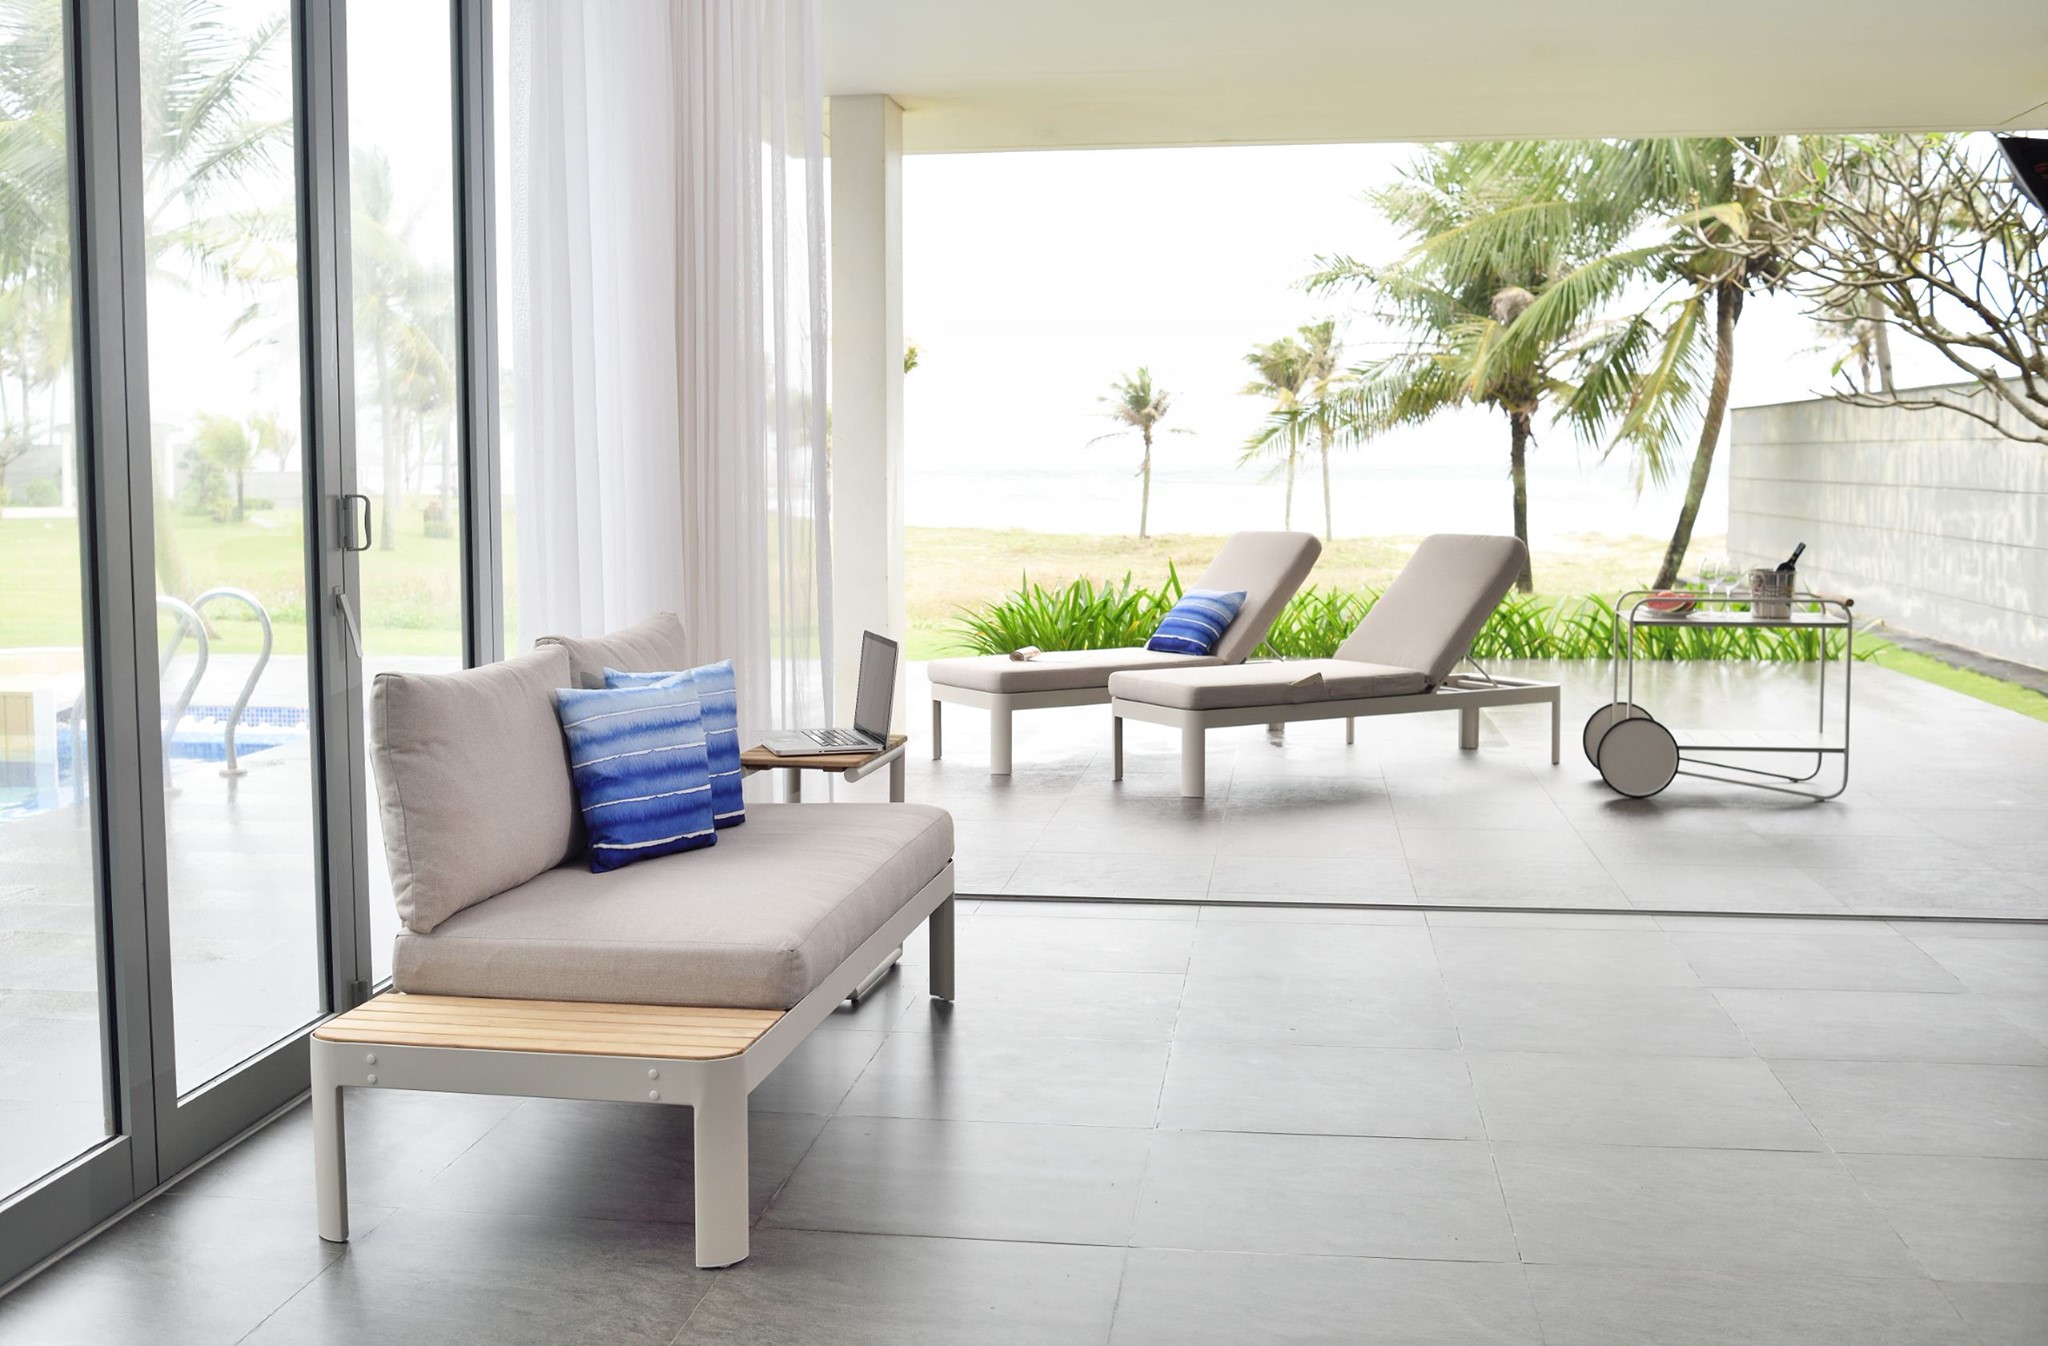 Portals Light - Whether dining in style or creating new possibilities with the modular sofa seating, redefine your outsi... » Outdoor Furniture Fuengirola, Costa Del Sol, Spain